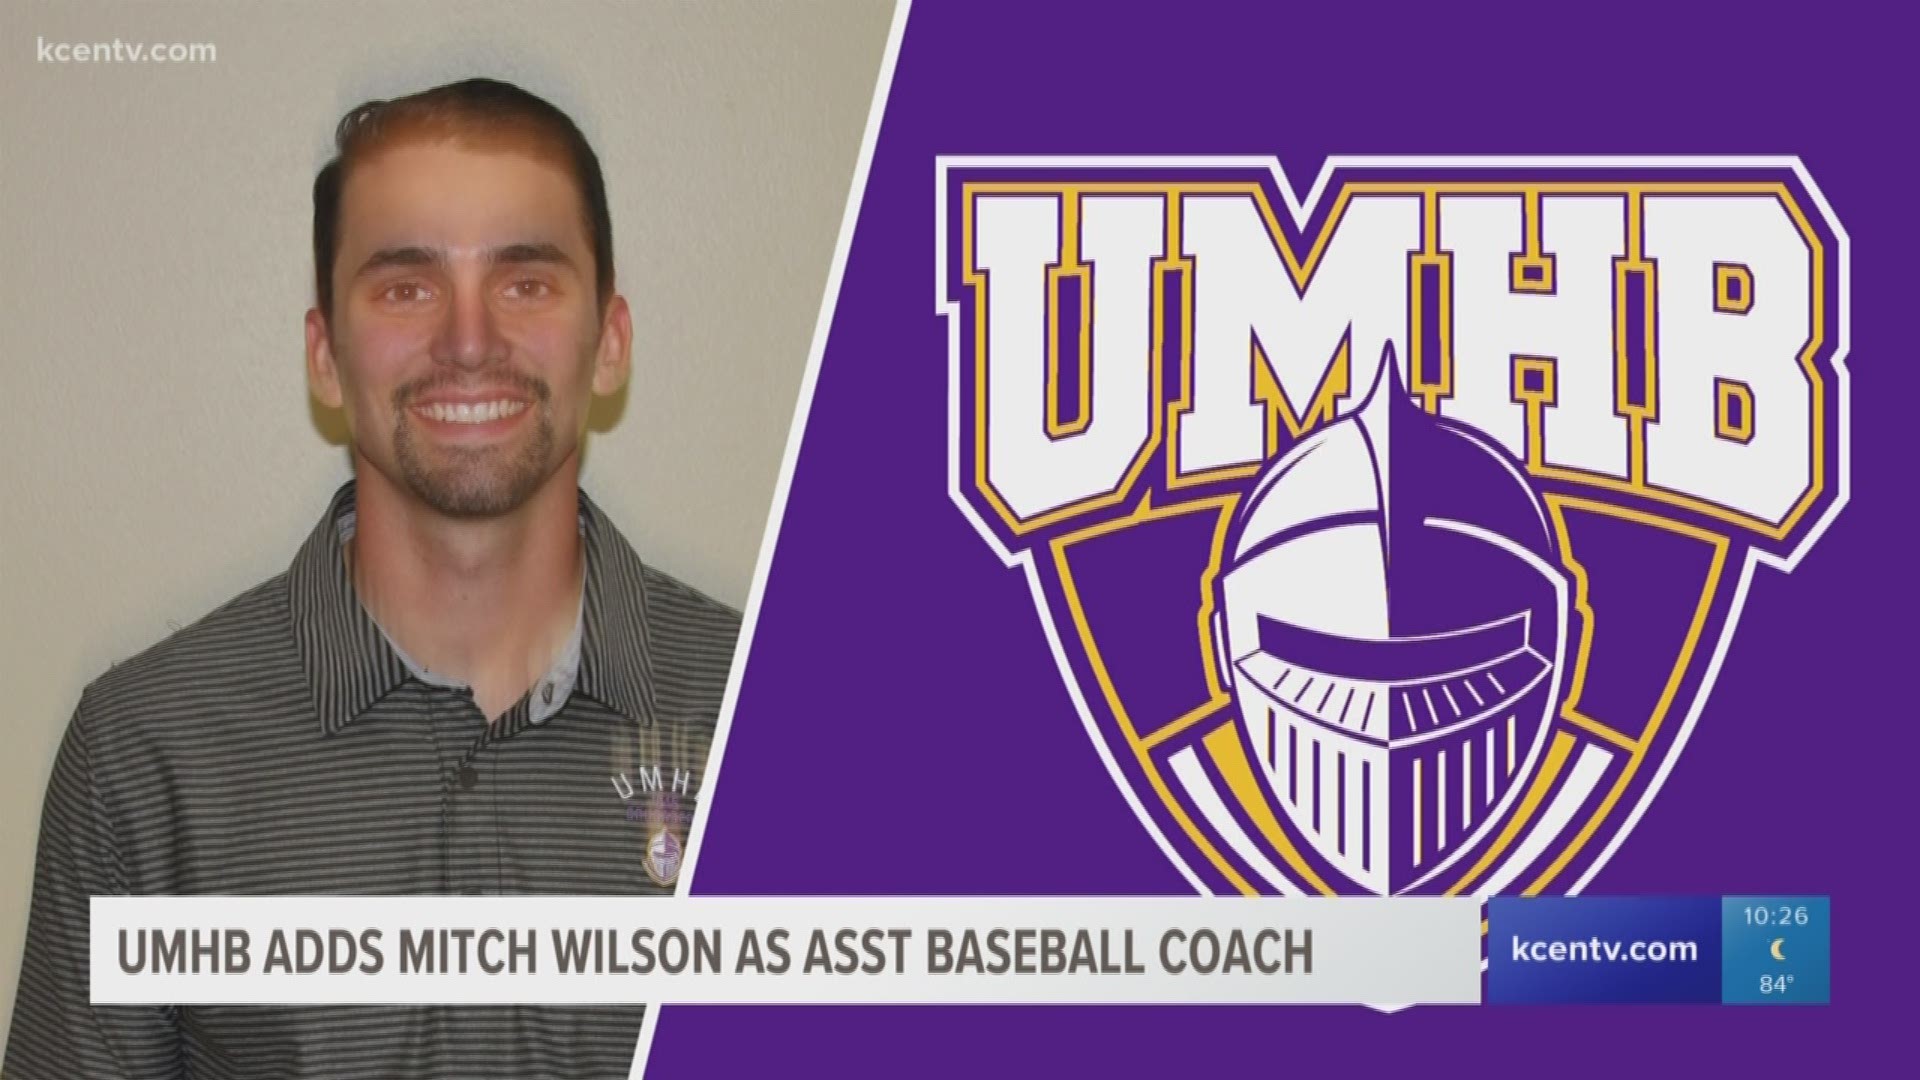 Mitch Wilson spent last season as a grad assistant at Concordia University in Chicago. He helped guide the Cougars to a 42-10 record and an NCAA Division Three Super Regionals appearance.